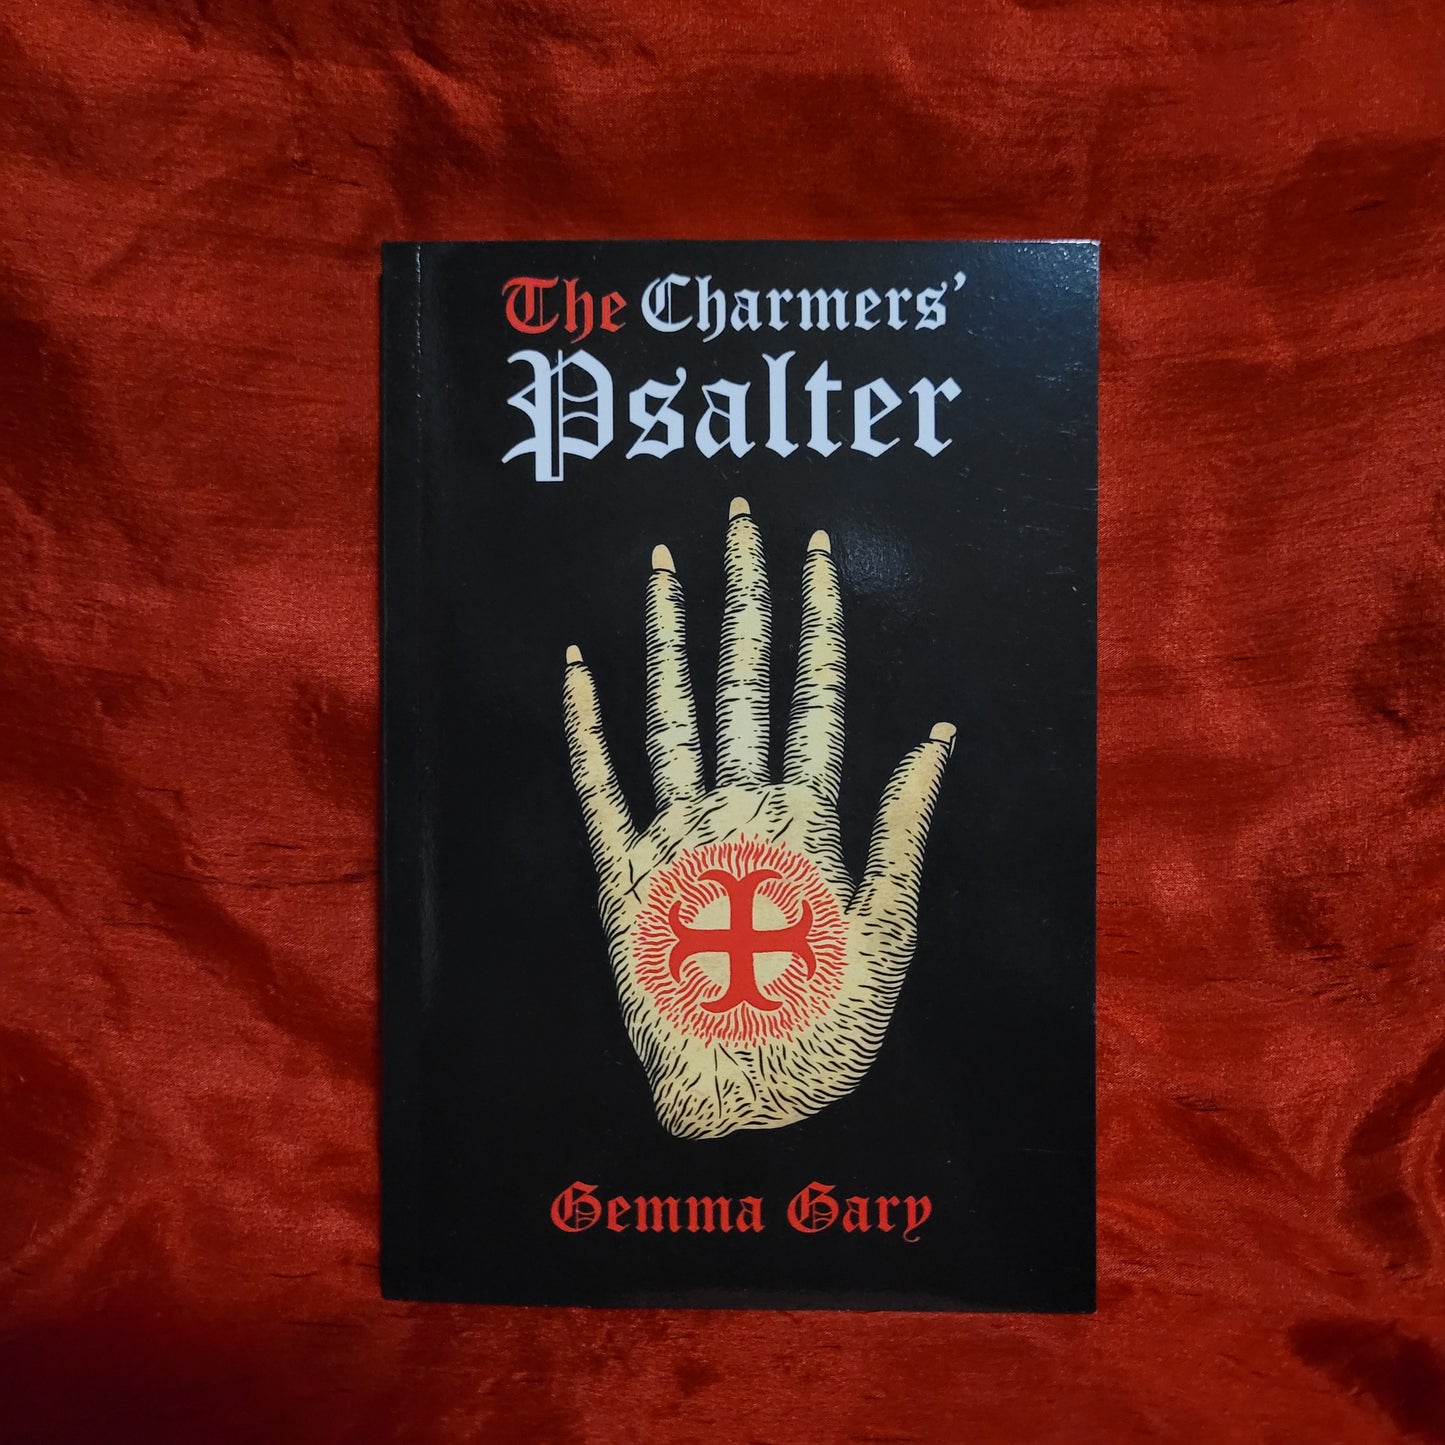 The Charmer's Psalter by Gemma Gary (Troy Books, 2017) Paperback Edition